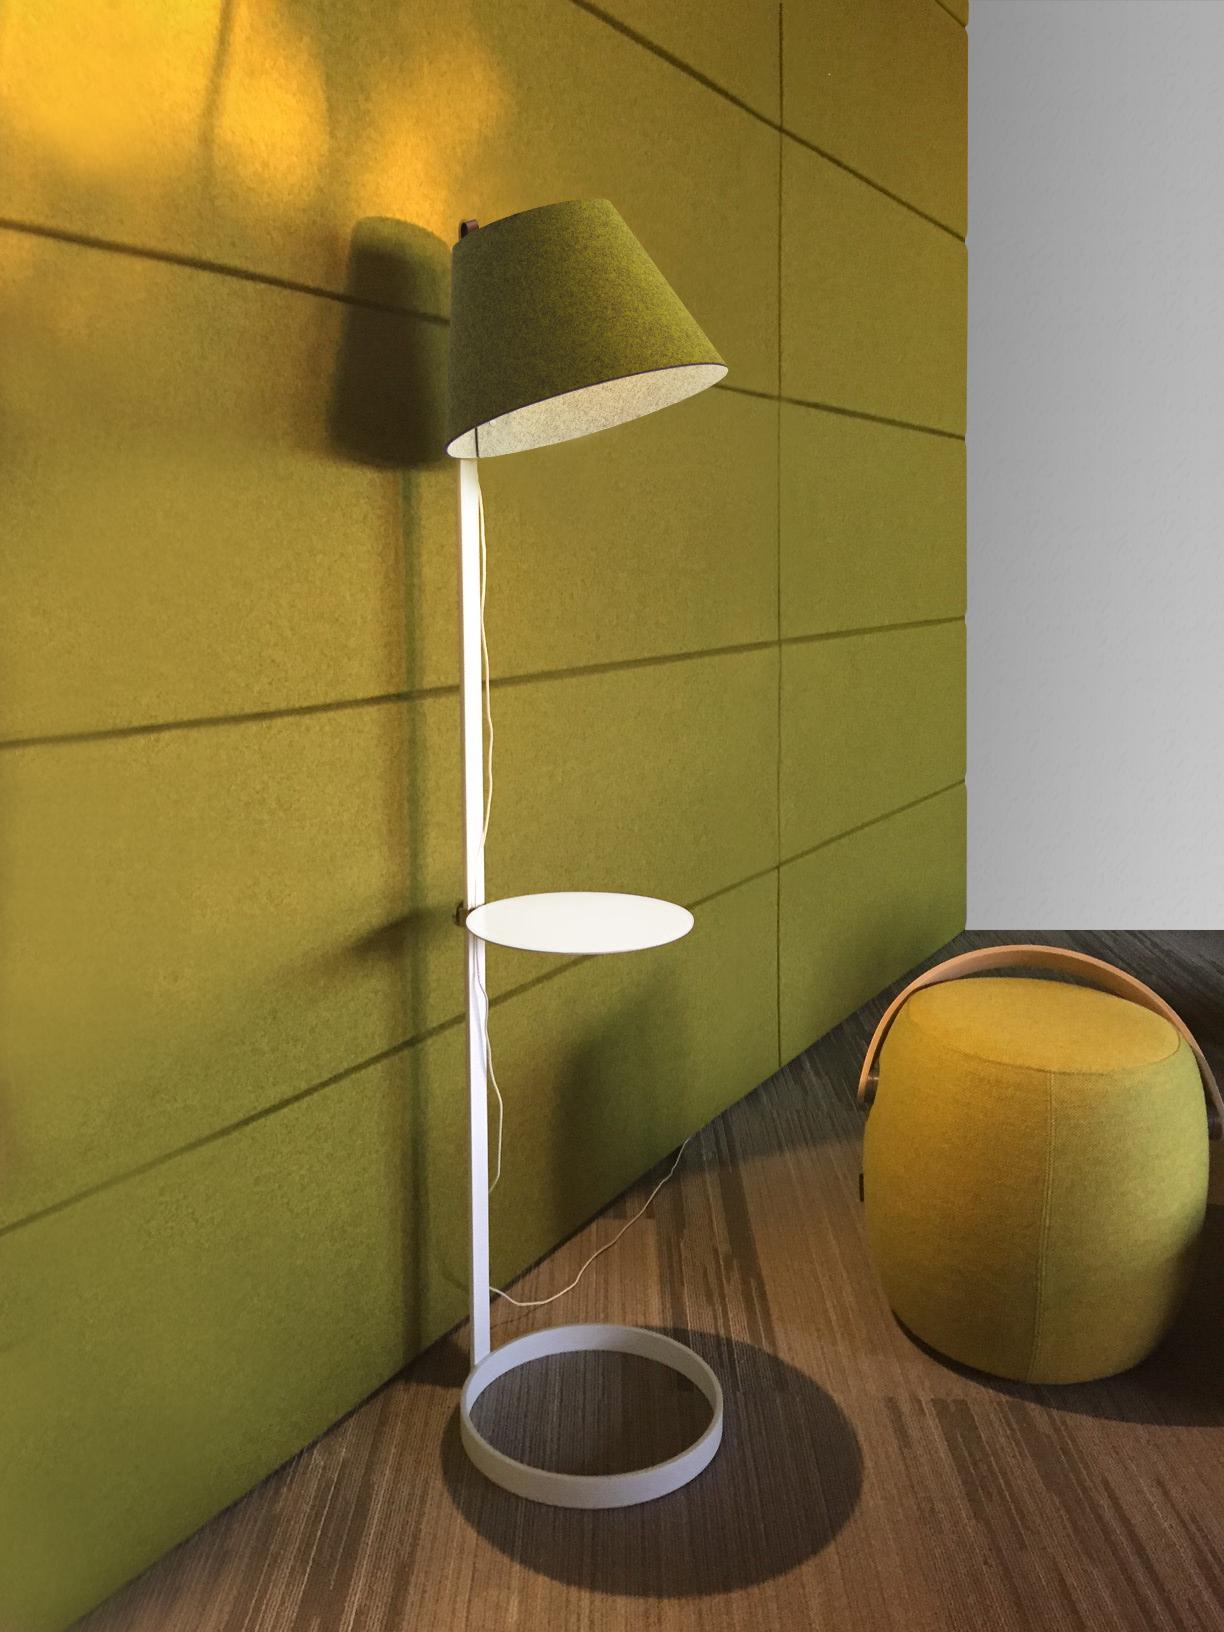 Lana Floor Lamp in Charcoal and Grey with Tray and White Base by Pablo Designs (Moderne)